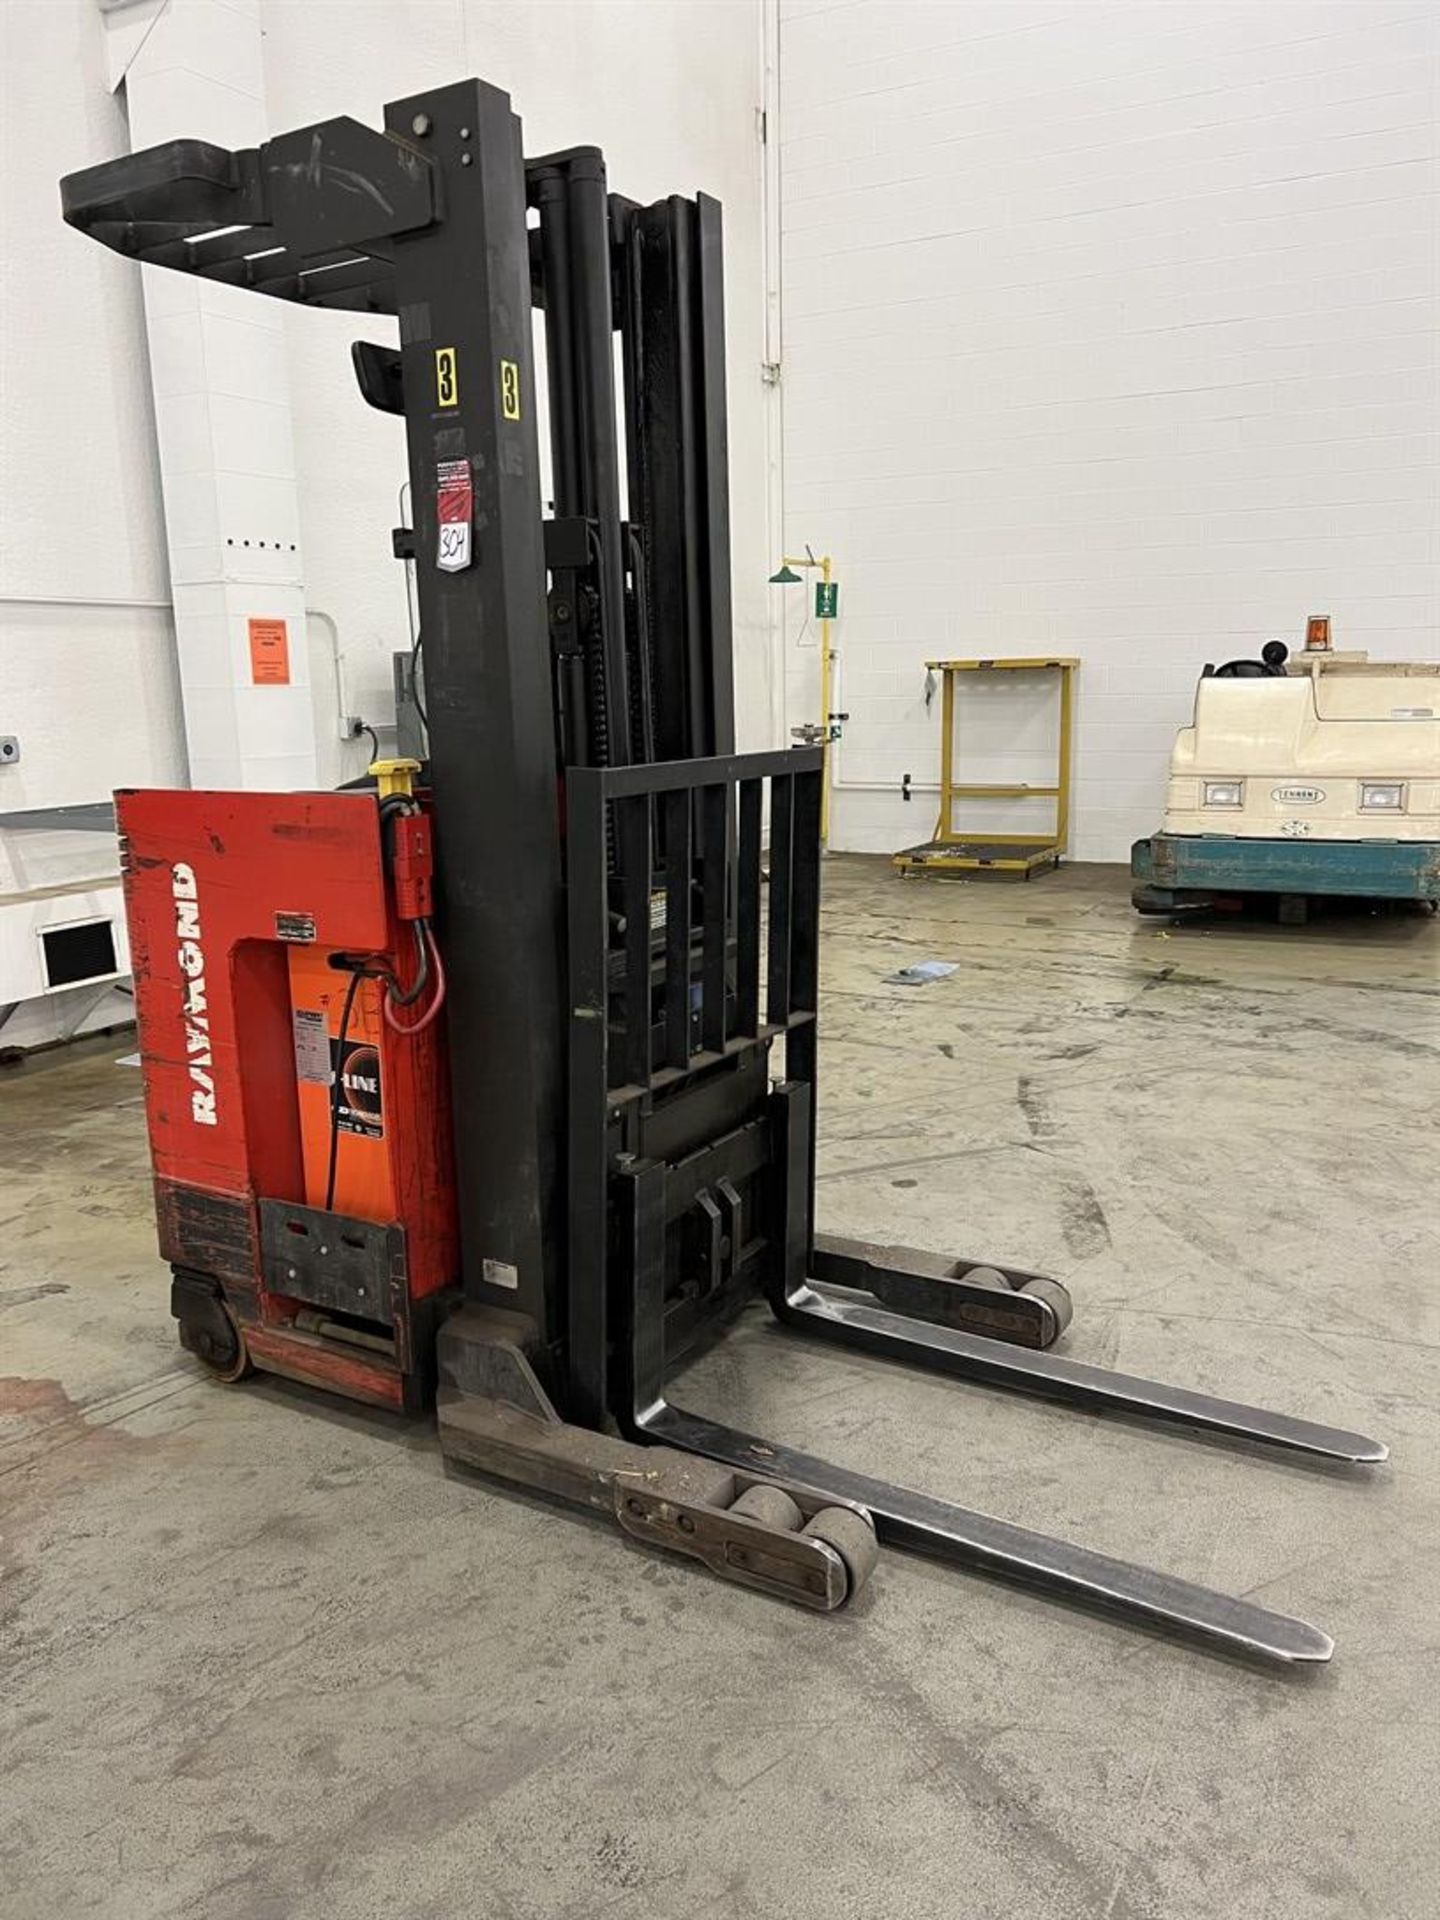 RAYMOND EASI-R40TT Stand Up Electric Forklift, s/n ET-B-94-01110,